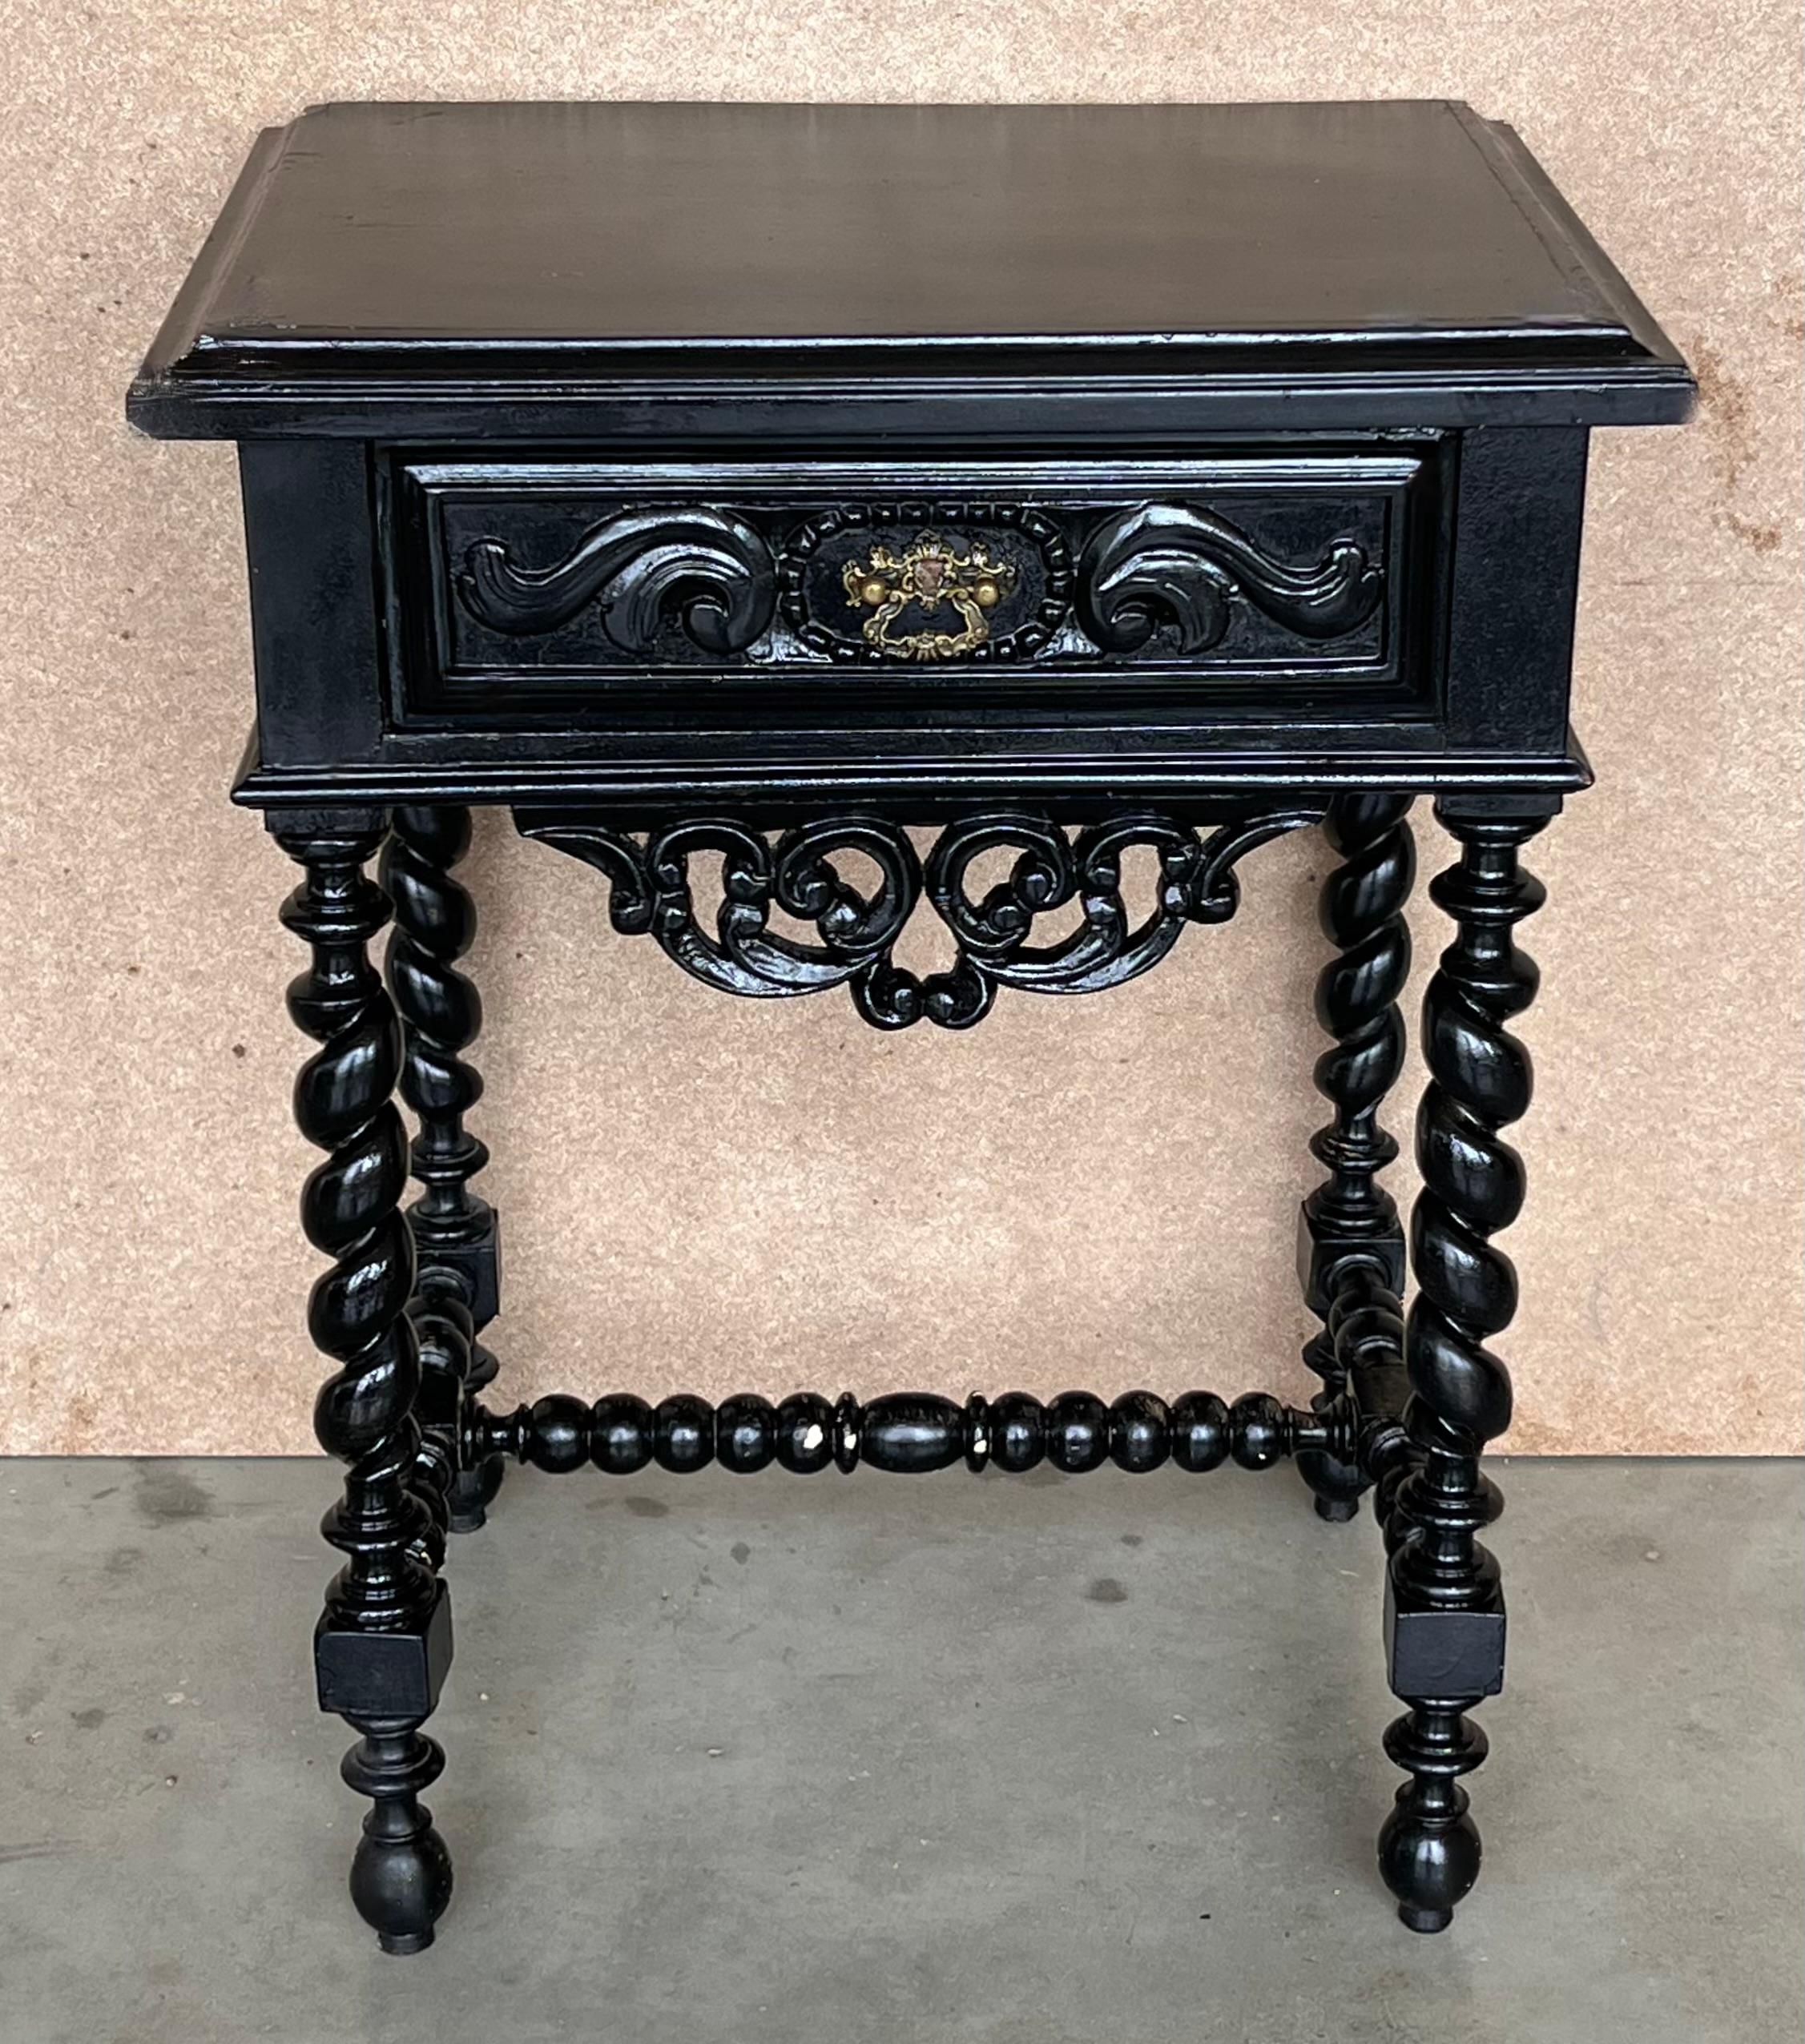 20th century pair of solid carved Spanish nightstands with Solomonic columns and carved crest under the drawers in black ebonized wood.
It has one carved drawer and Solomonic T.form stretcher.